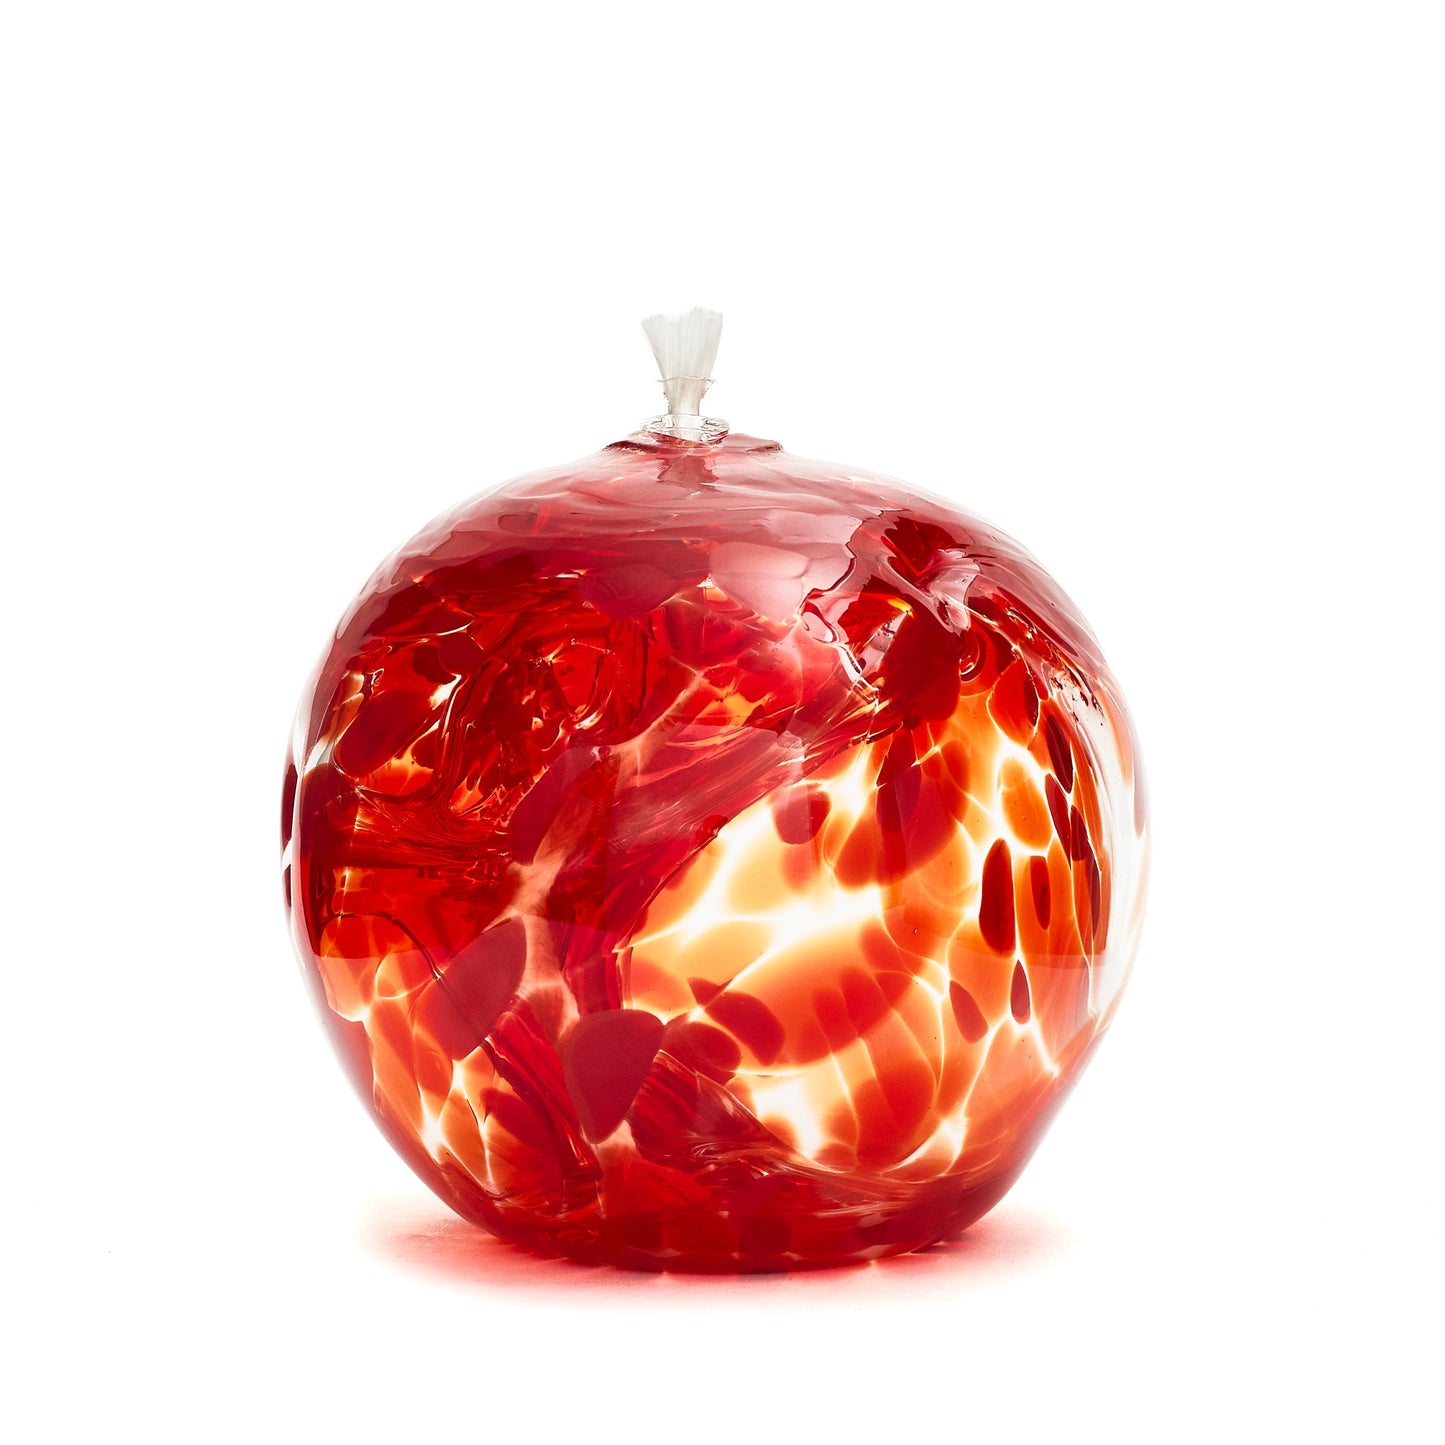 Handmade round ruby red glass oil lamp. Made in Ontario Canada by Gray Art Glass.